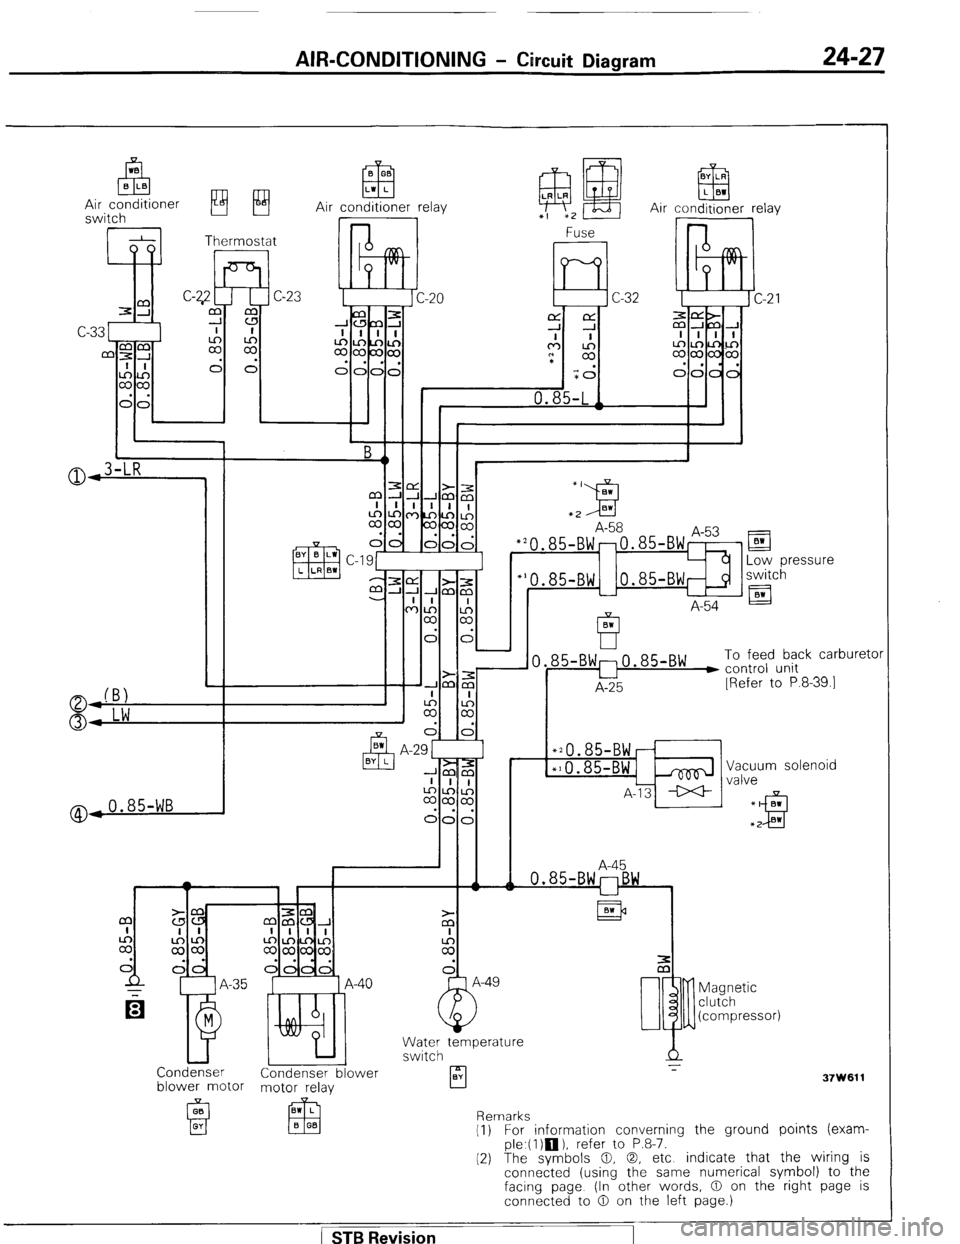 MITSUBISHI MONTERO 1987 1.G Workshop Manual AIR-CONDITIONING - Circuit Diagram 24-27 
Air conditioner relay 
@,0.85-WB 
El 
Low pressure 
switch 
A-54 El 
85-BW:0.85-BW ) To feed back carburetc 
u control unit 
A-25 [Refer to P.8-39.1 
*20.85-B